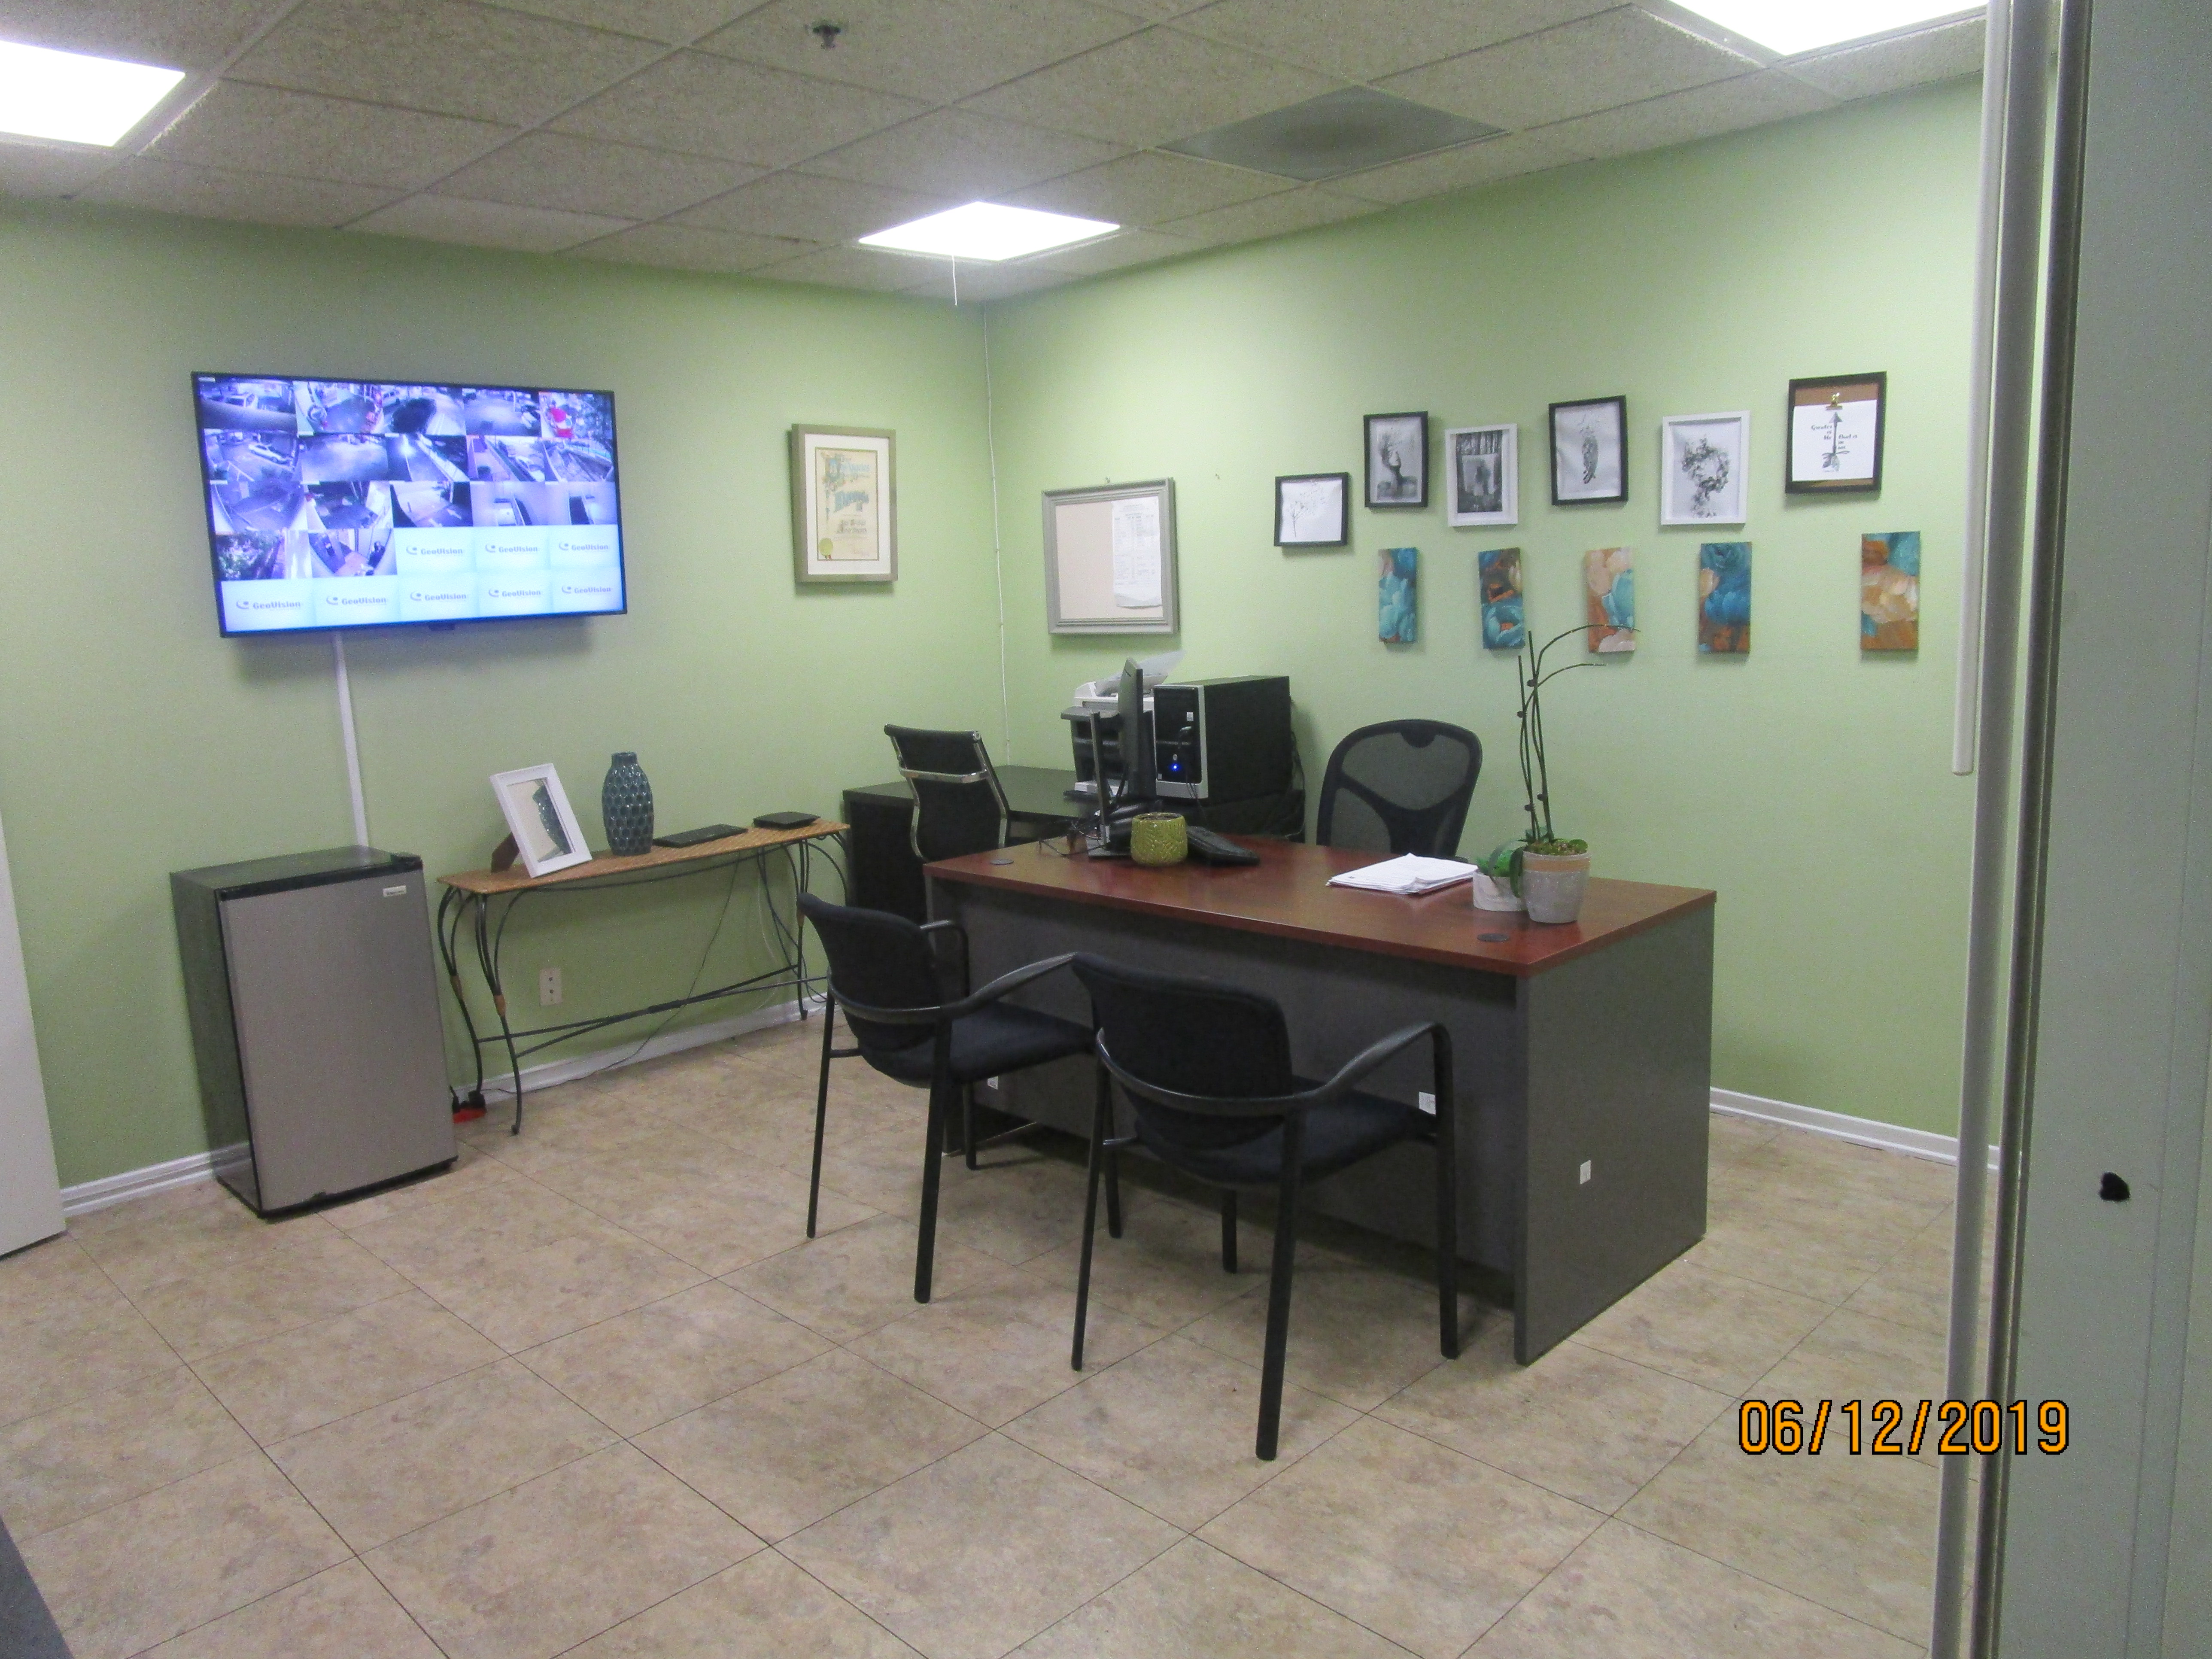 View of an office, light brown and beige linoleum floors, light green walls, multiple picture frames, a TV hanging on the left side wall, a compact fridge, a coffee table with a picture frame and decorations against the left side wall, a desk with a chair